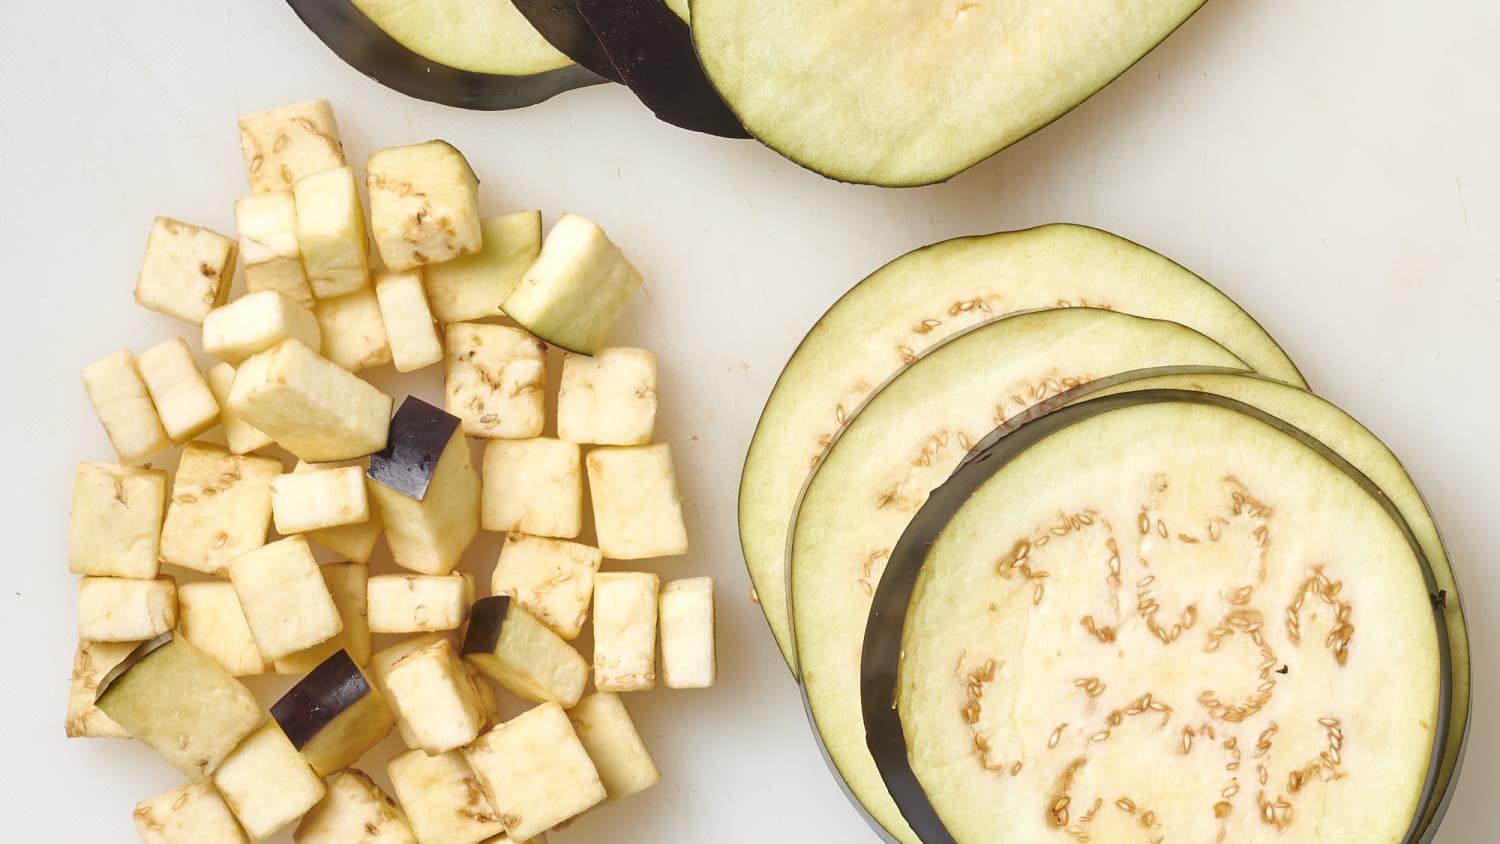 How to Cut Eggplant {Step-by-Step Tutorial} - FeelGoodFoodie